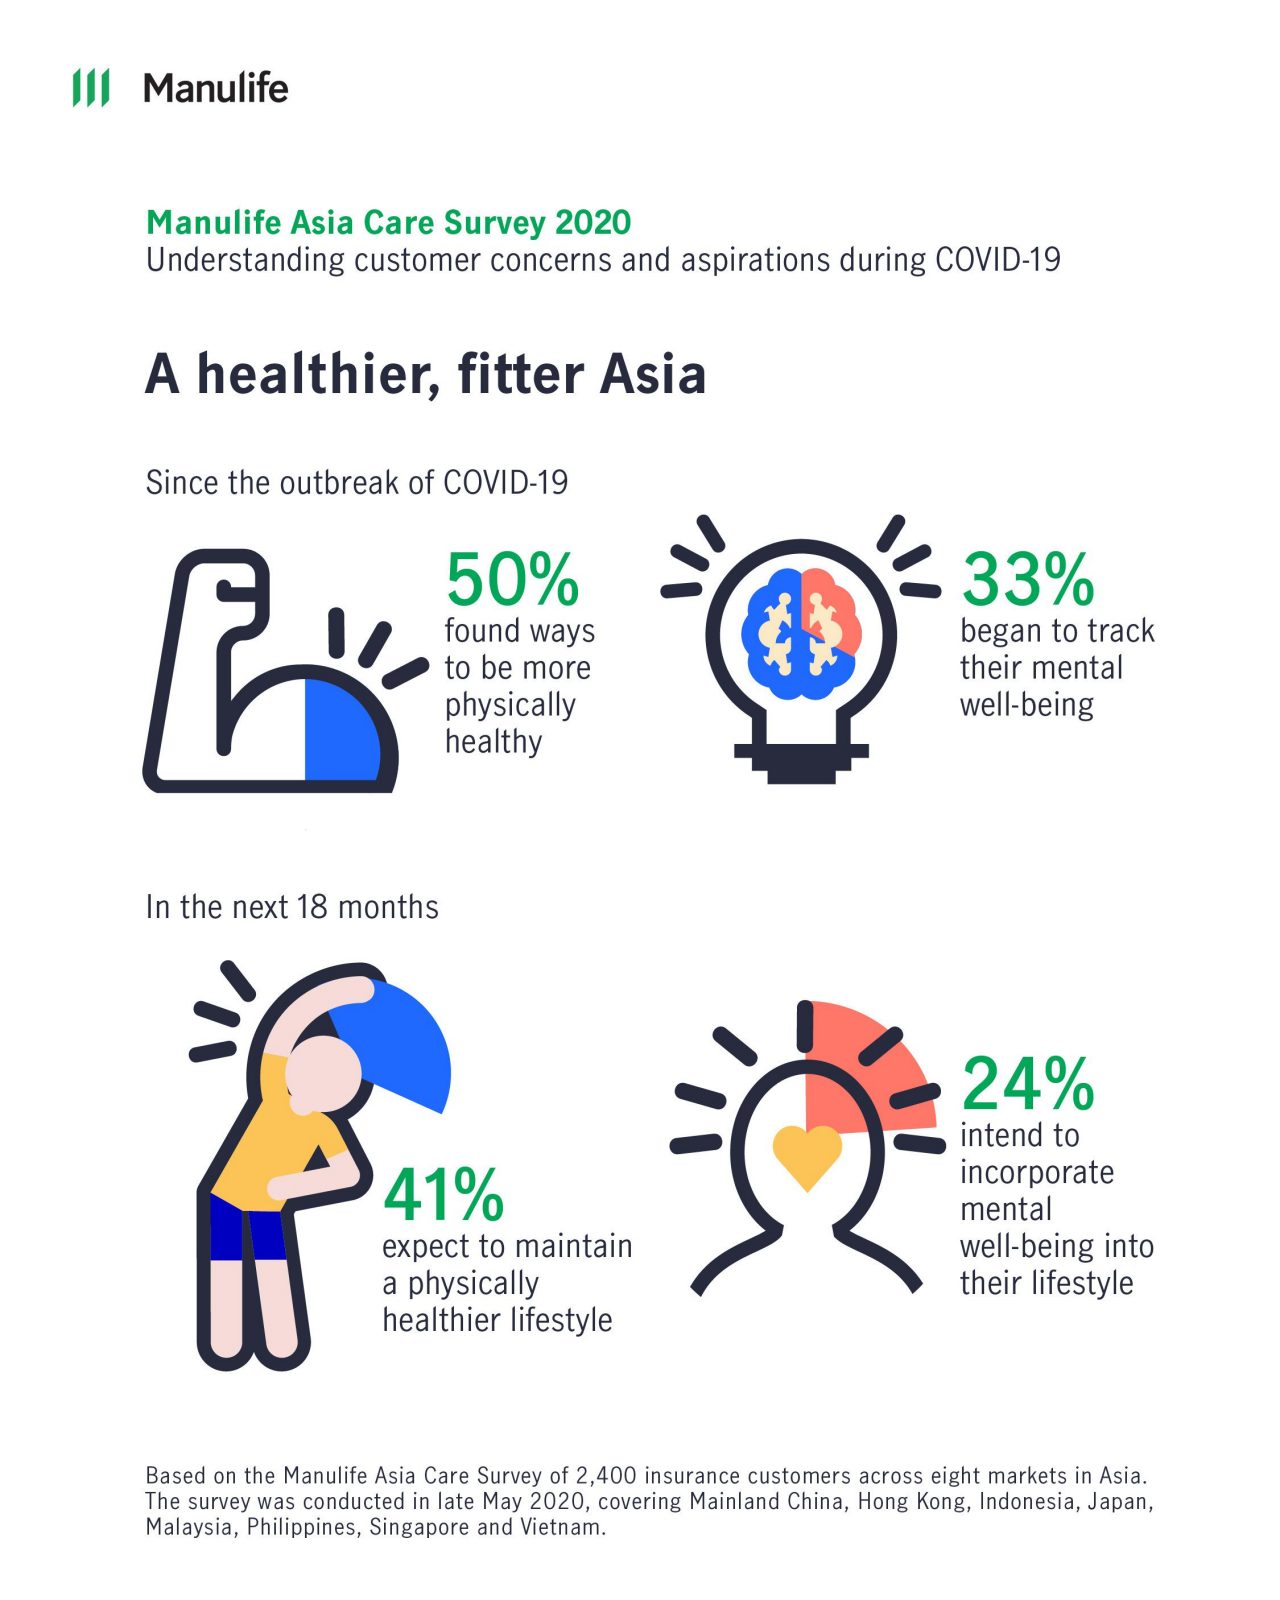 Infographic: A Healthier, fitter Asia. Since the COVID-19 outbreak, 50% found ways to be more physically healthy. 33% began to track their mental well-being. In the next 18 months...41% expect to maintain a physically healthier lifestyle. 24% intend to incorporate mental well-being into their lifestyle. 